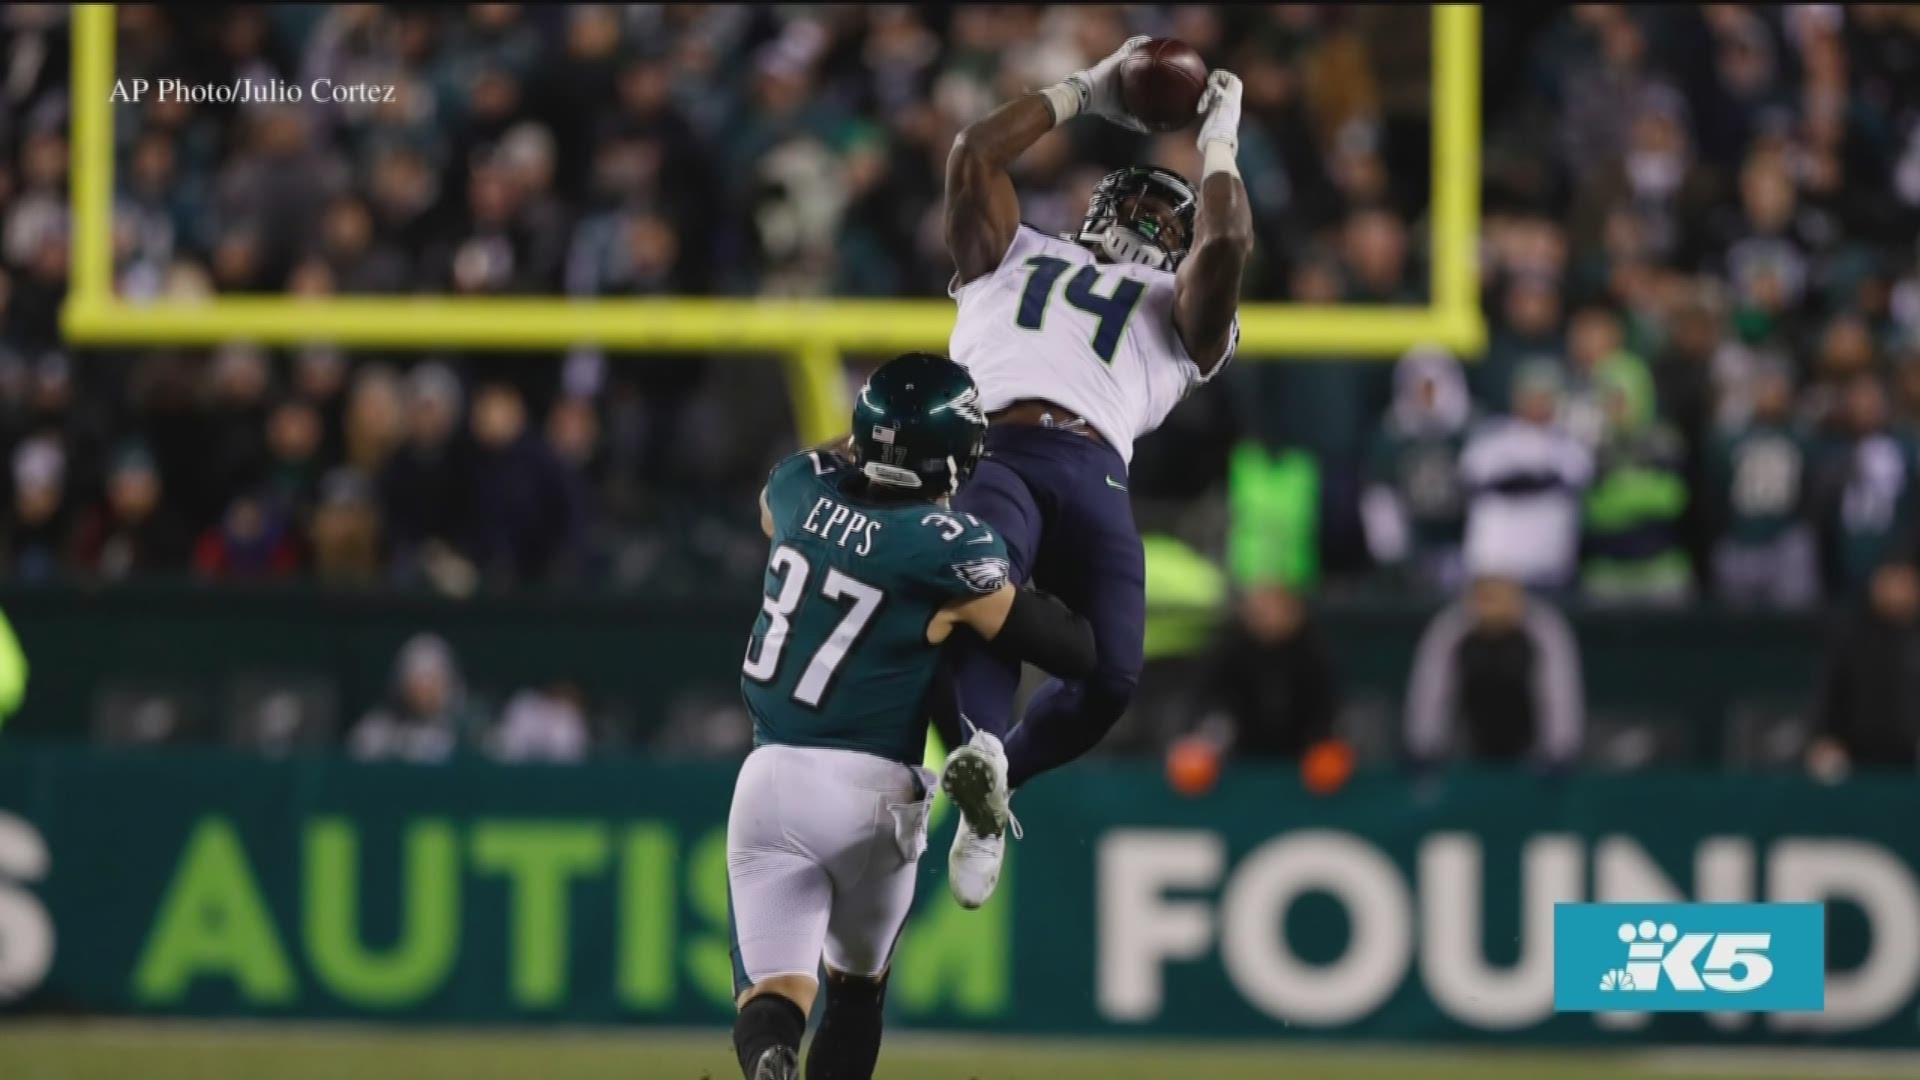 Terry Hollimon and Doug Farrar break down the SEA vs. PHI wild card game and what to expect next when the Seahawks go against the Green Bay Packers on Jan. 12.